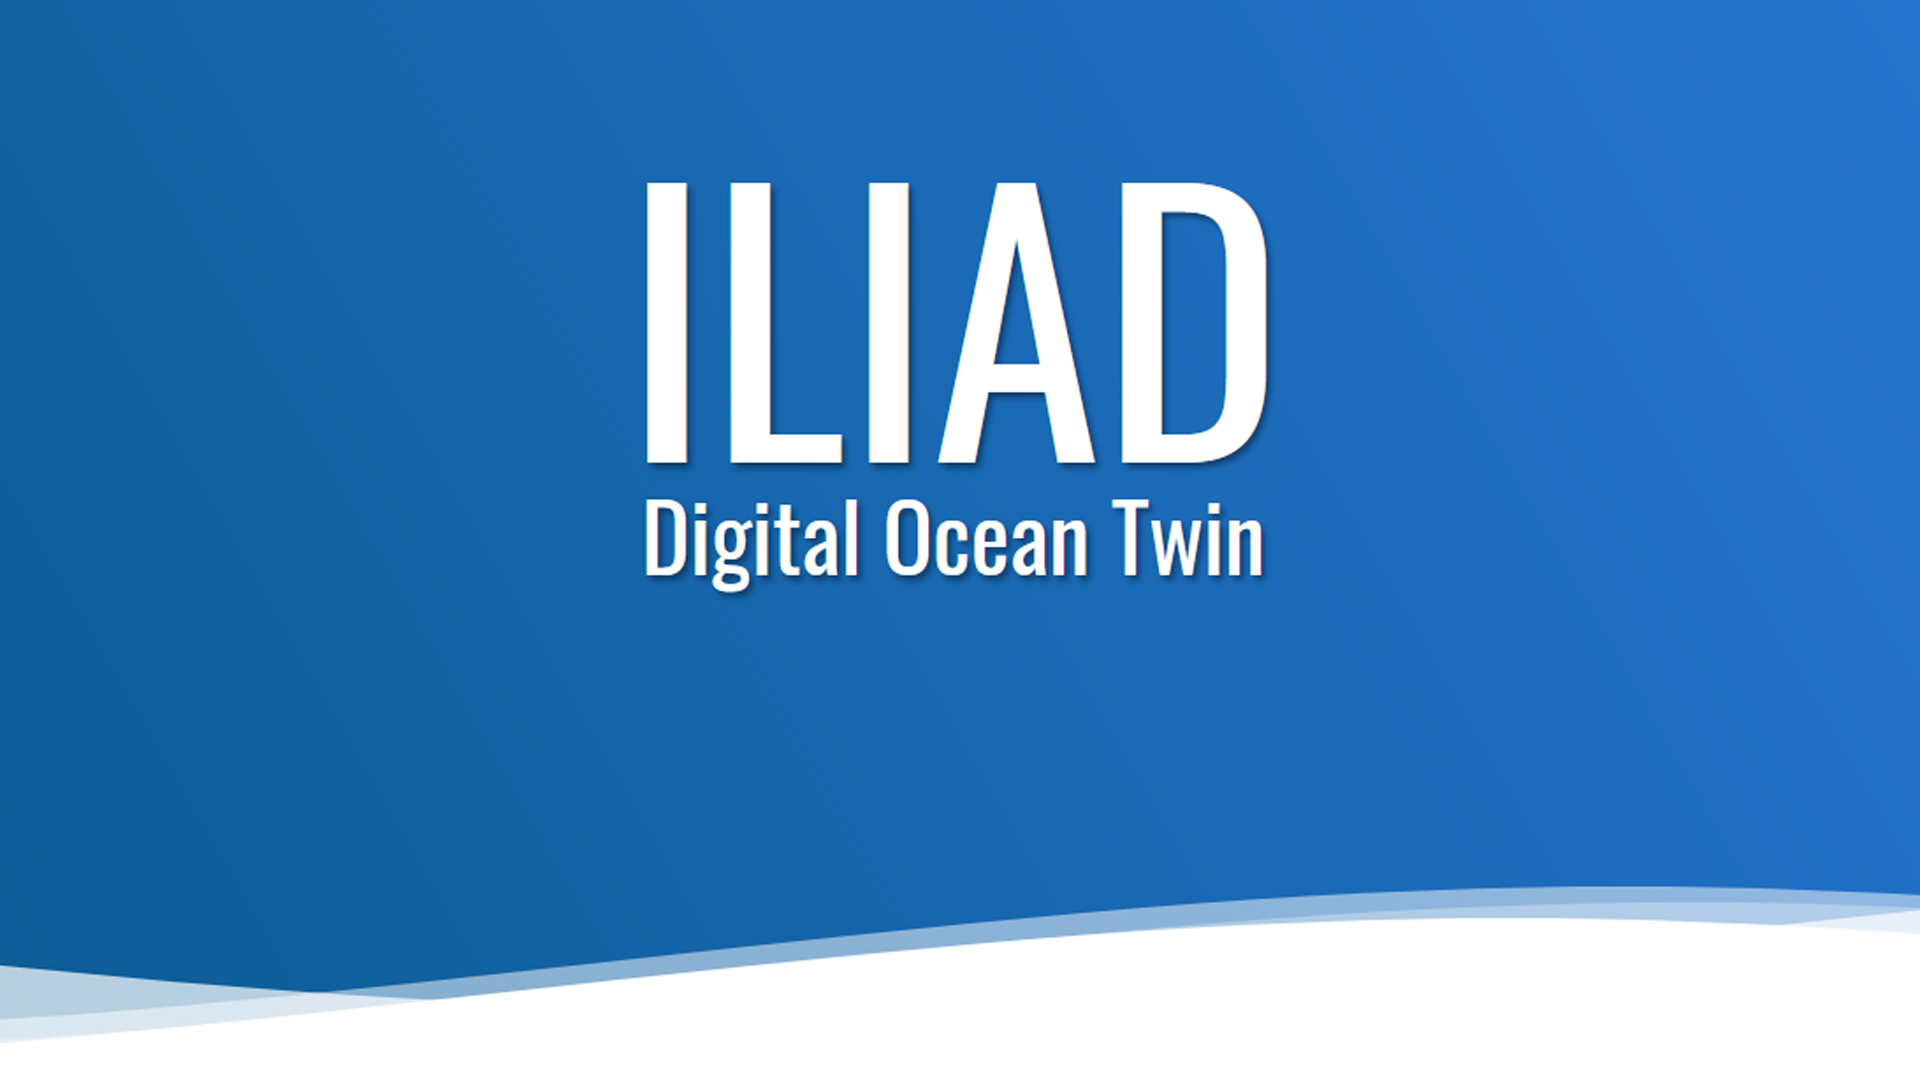 Launch of the ILIAD project